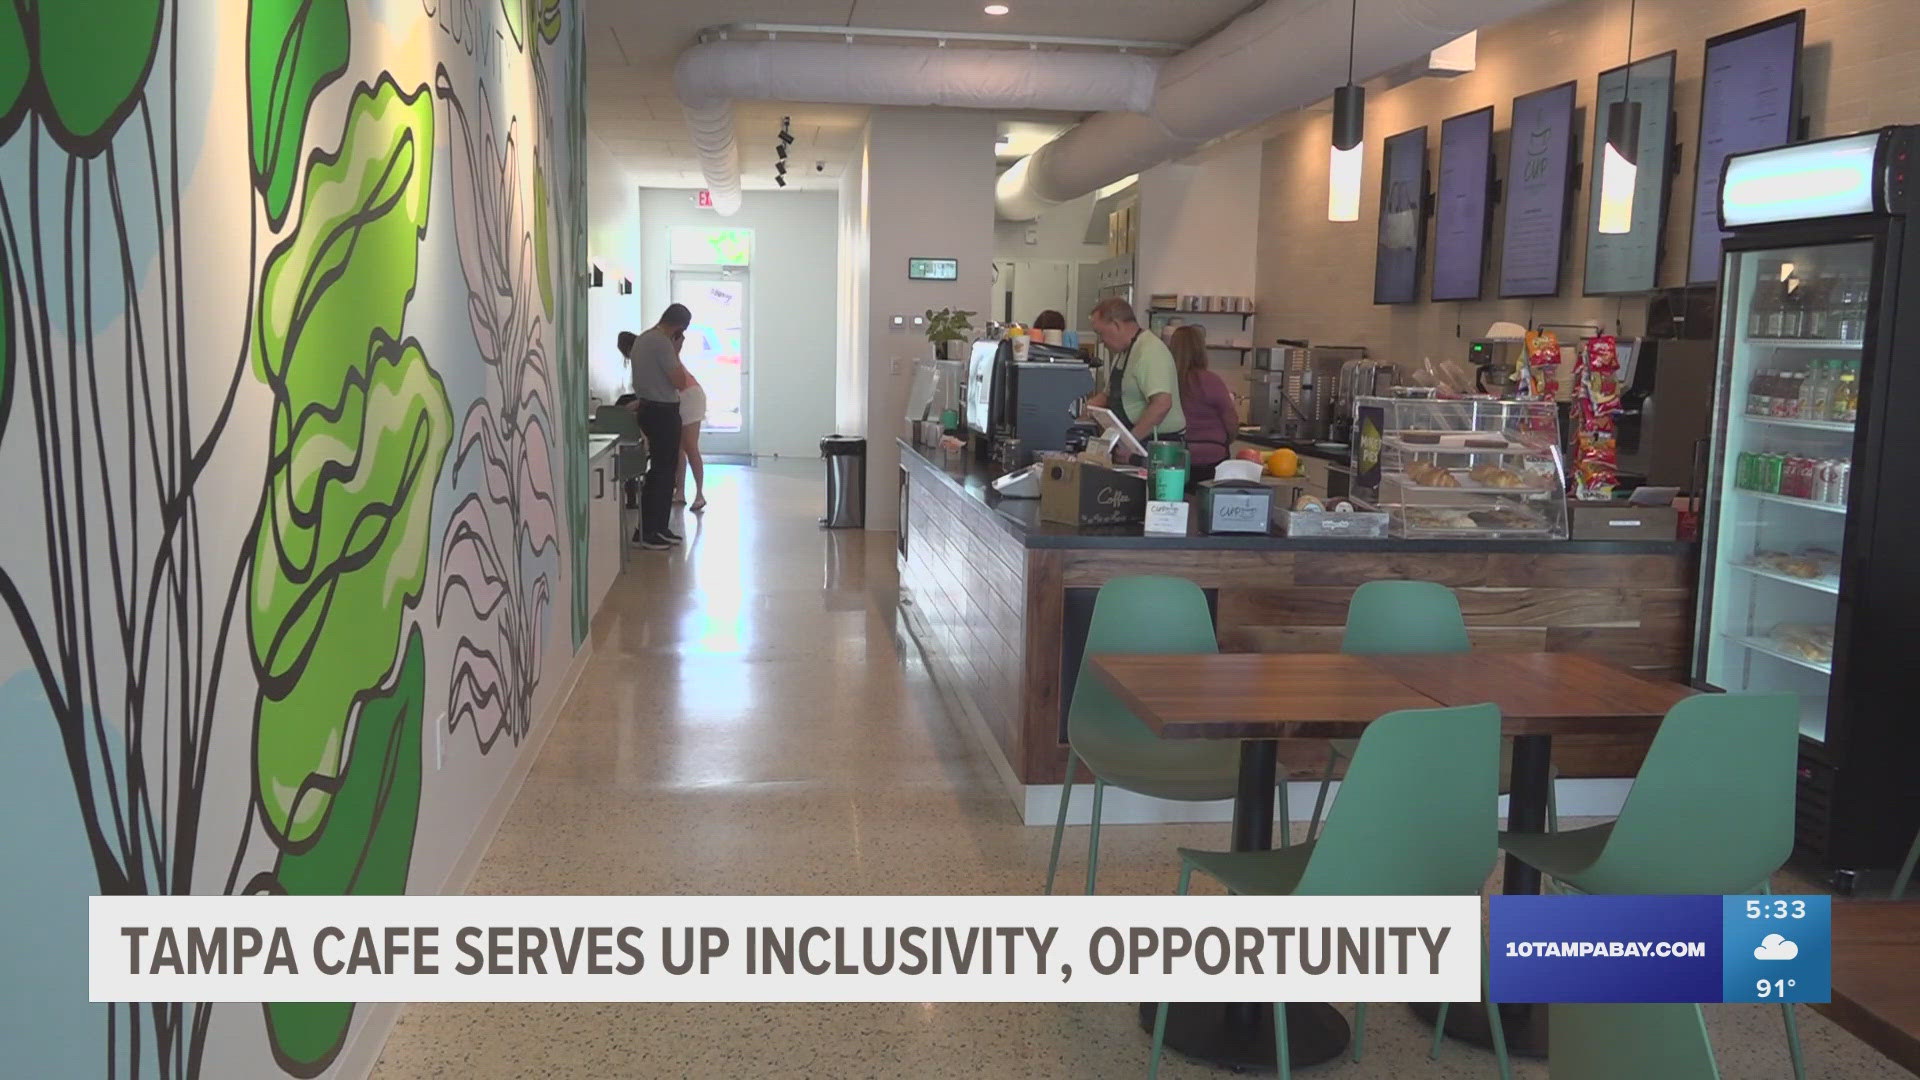 CUP, or Coffee Uniting People, is a local non-profit that employs people over 22 with disabilities.